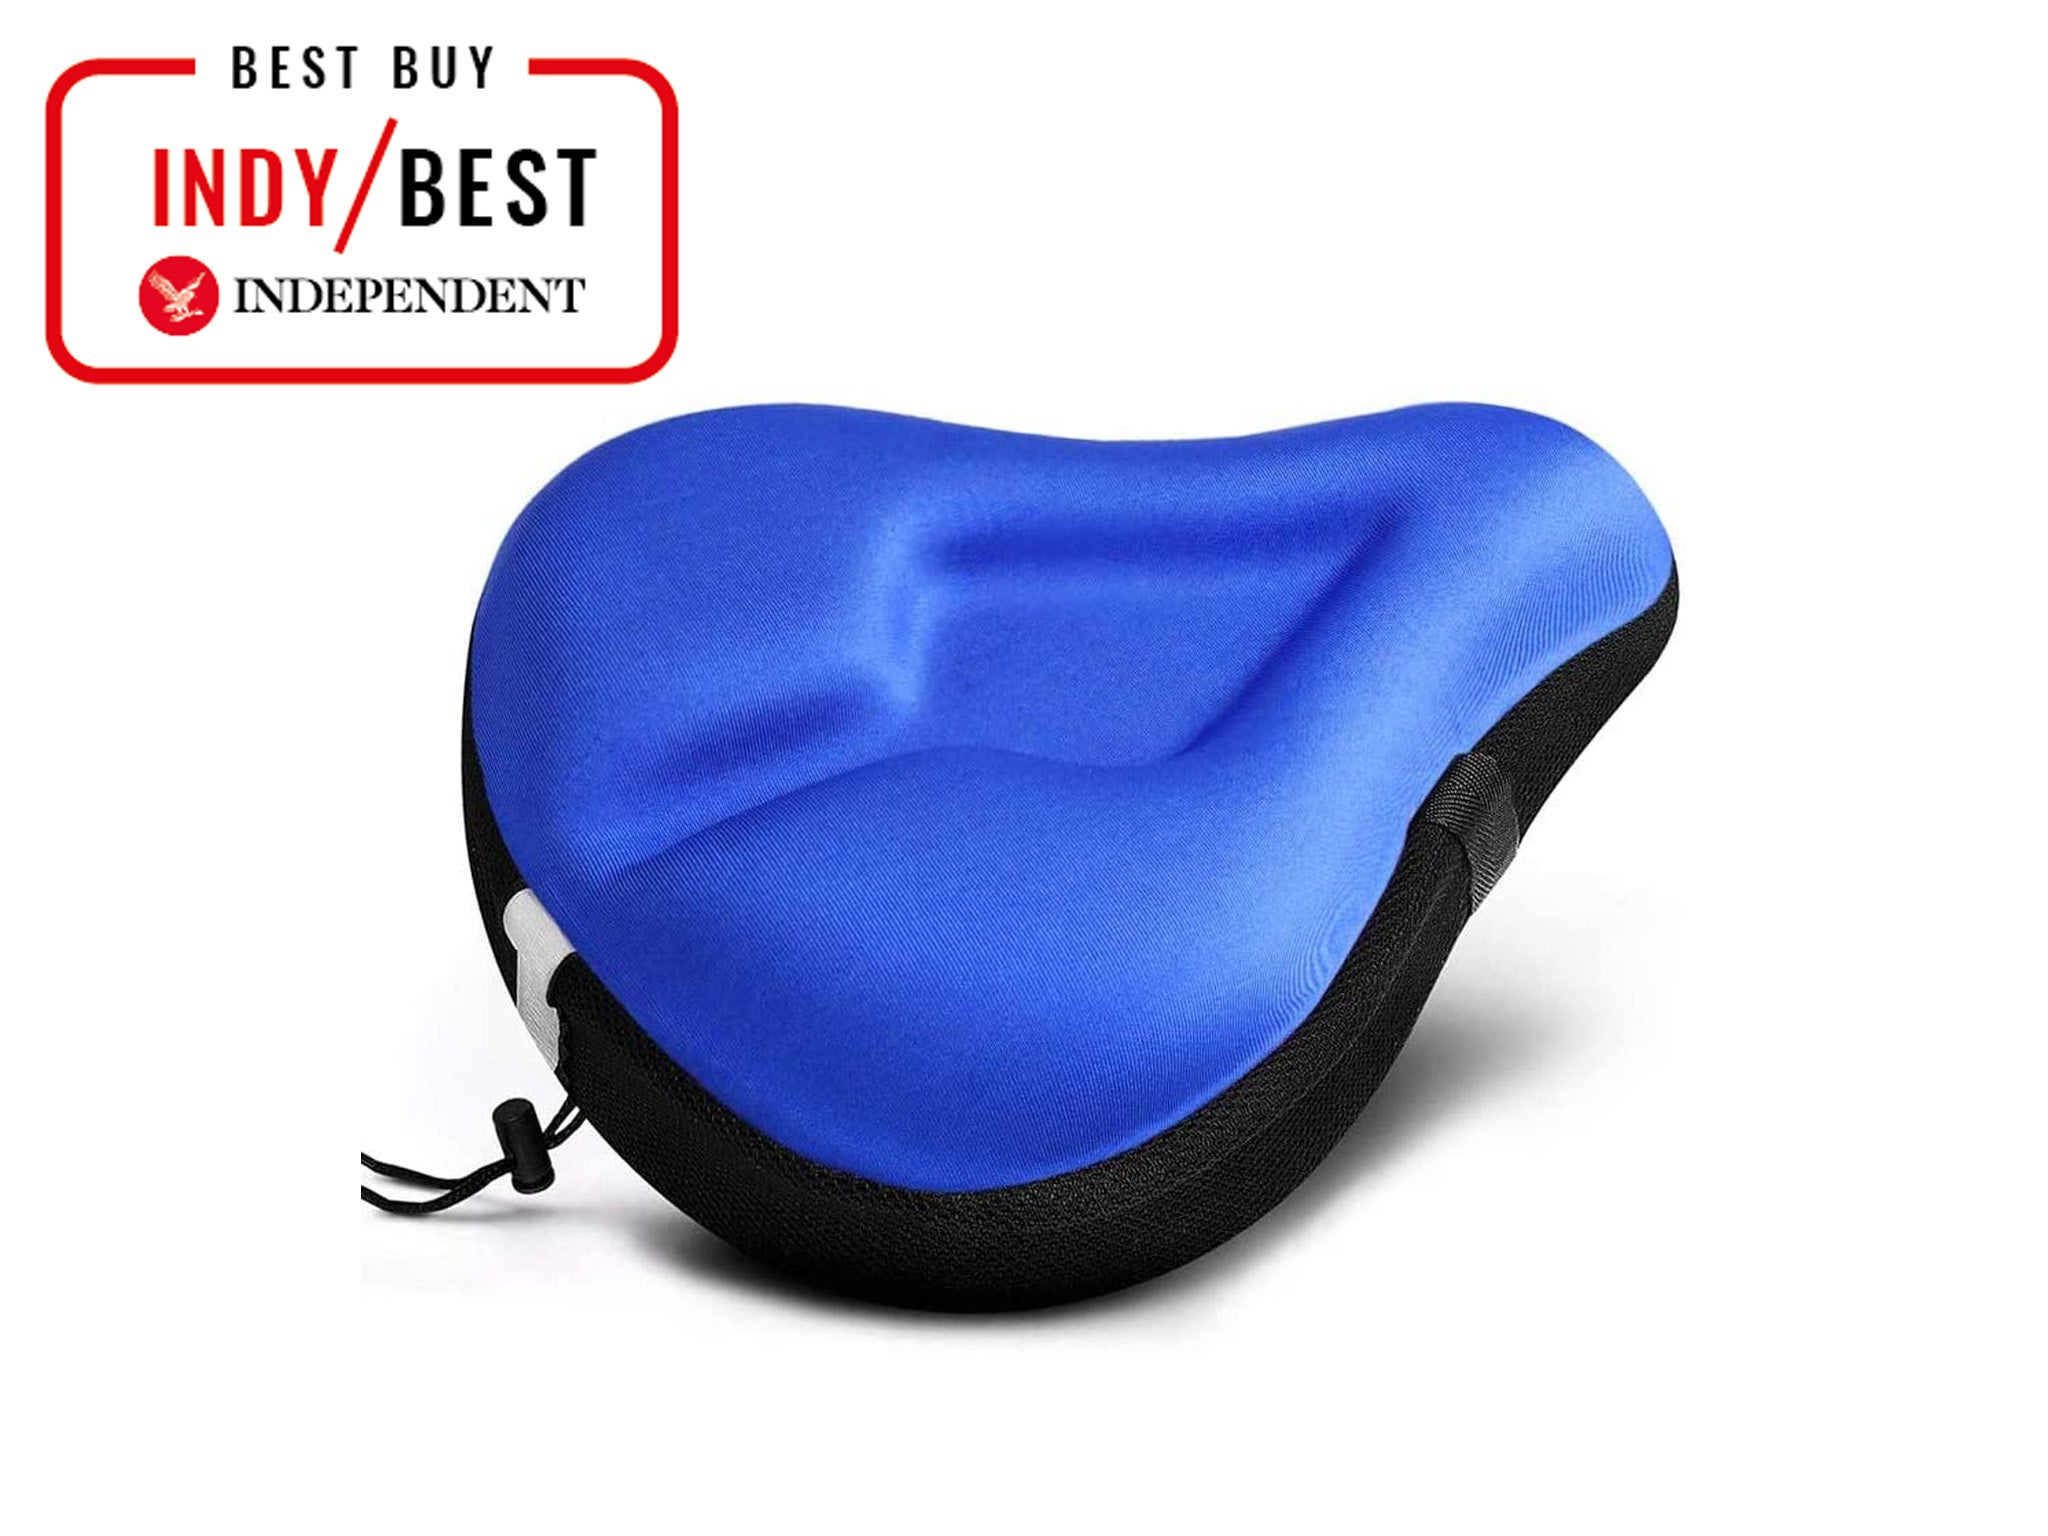 Black VORCOOL Bike Seat Cover,1Pcs Soft Gel Bicycle Seat Bike Saddle Cushion for Women and Men Fits Cruiser and Stationary Bike 